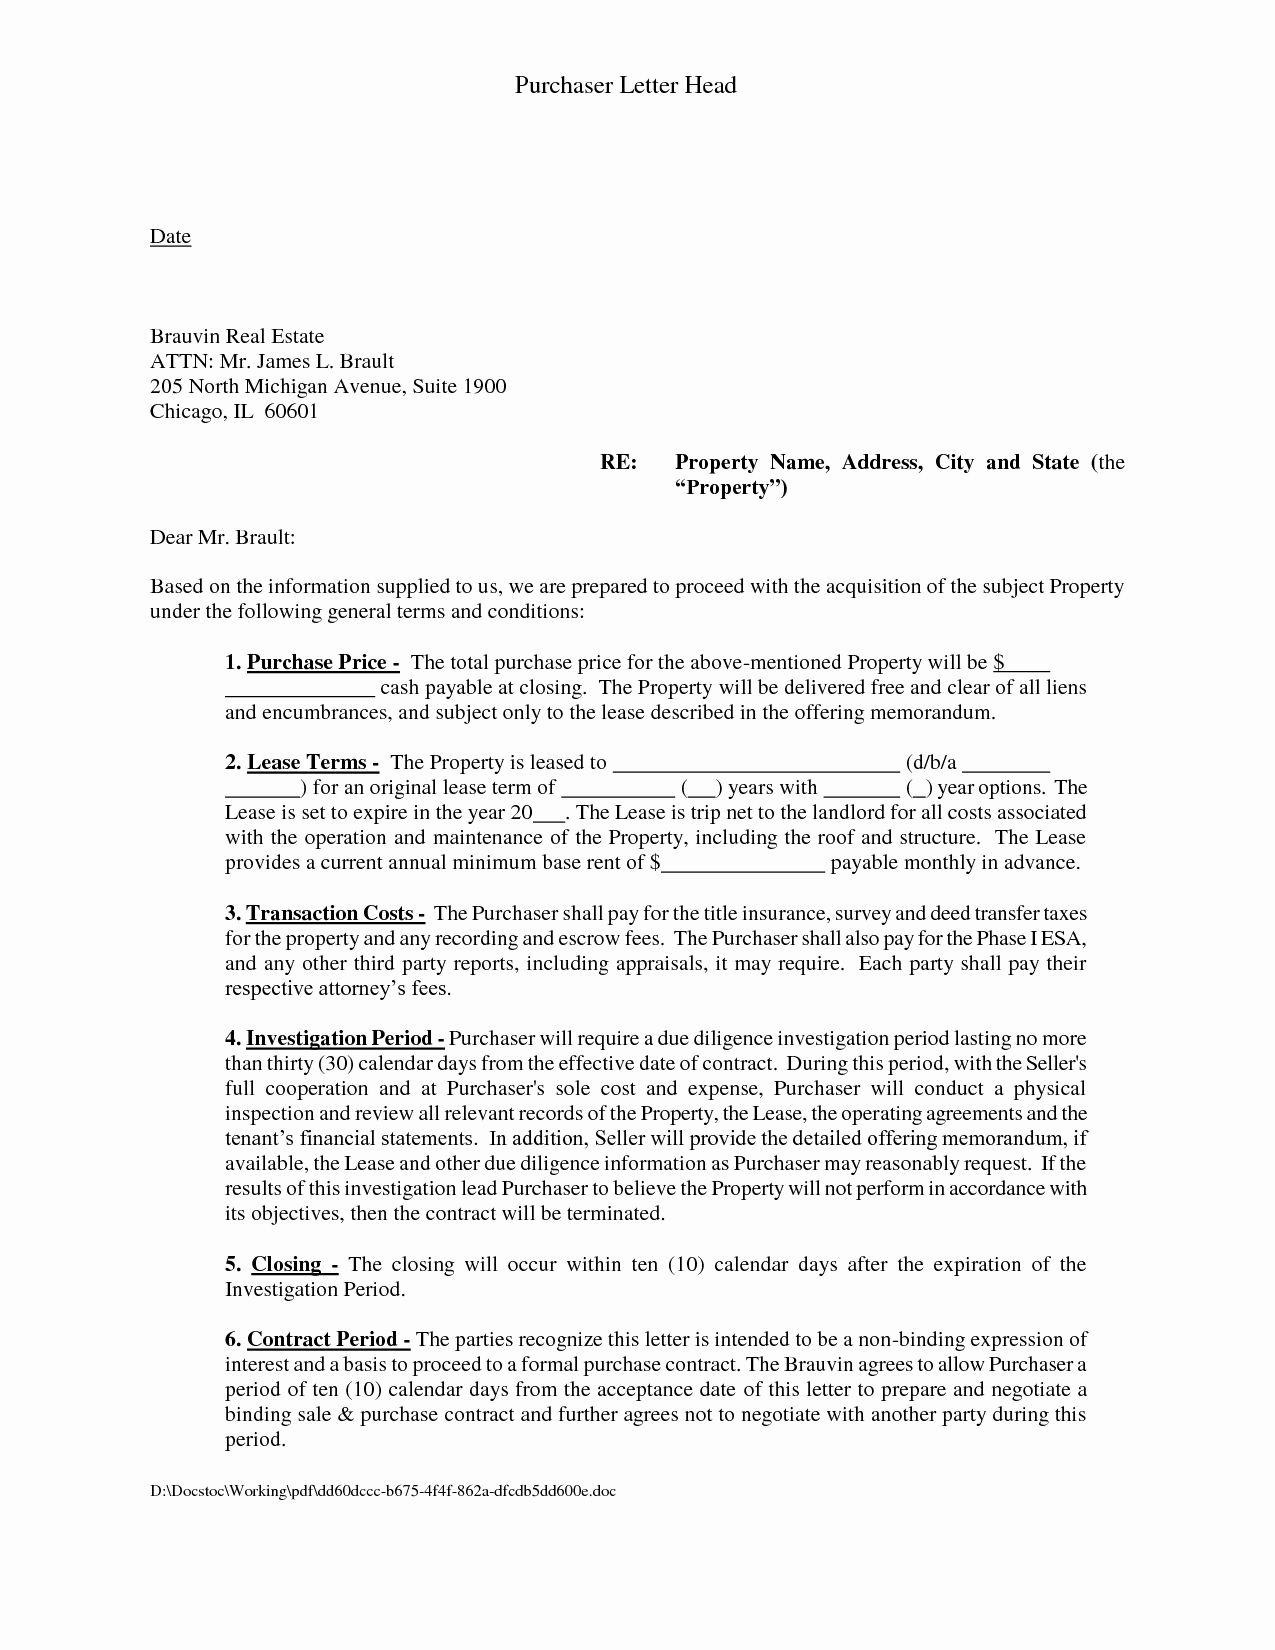 Real Estate Letter Of Intent Awesome Mercial Real Estate Lease Letter Intent Template